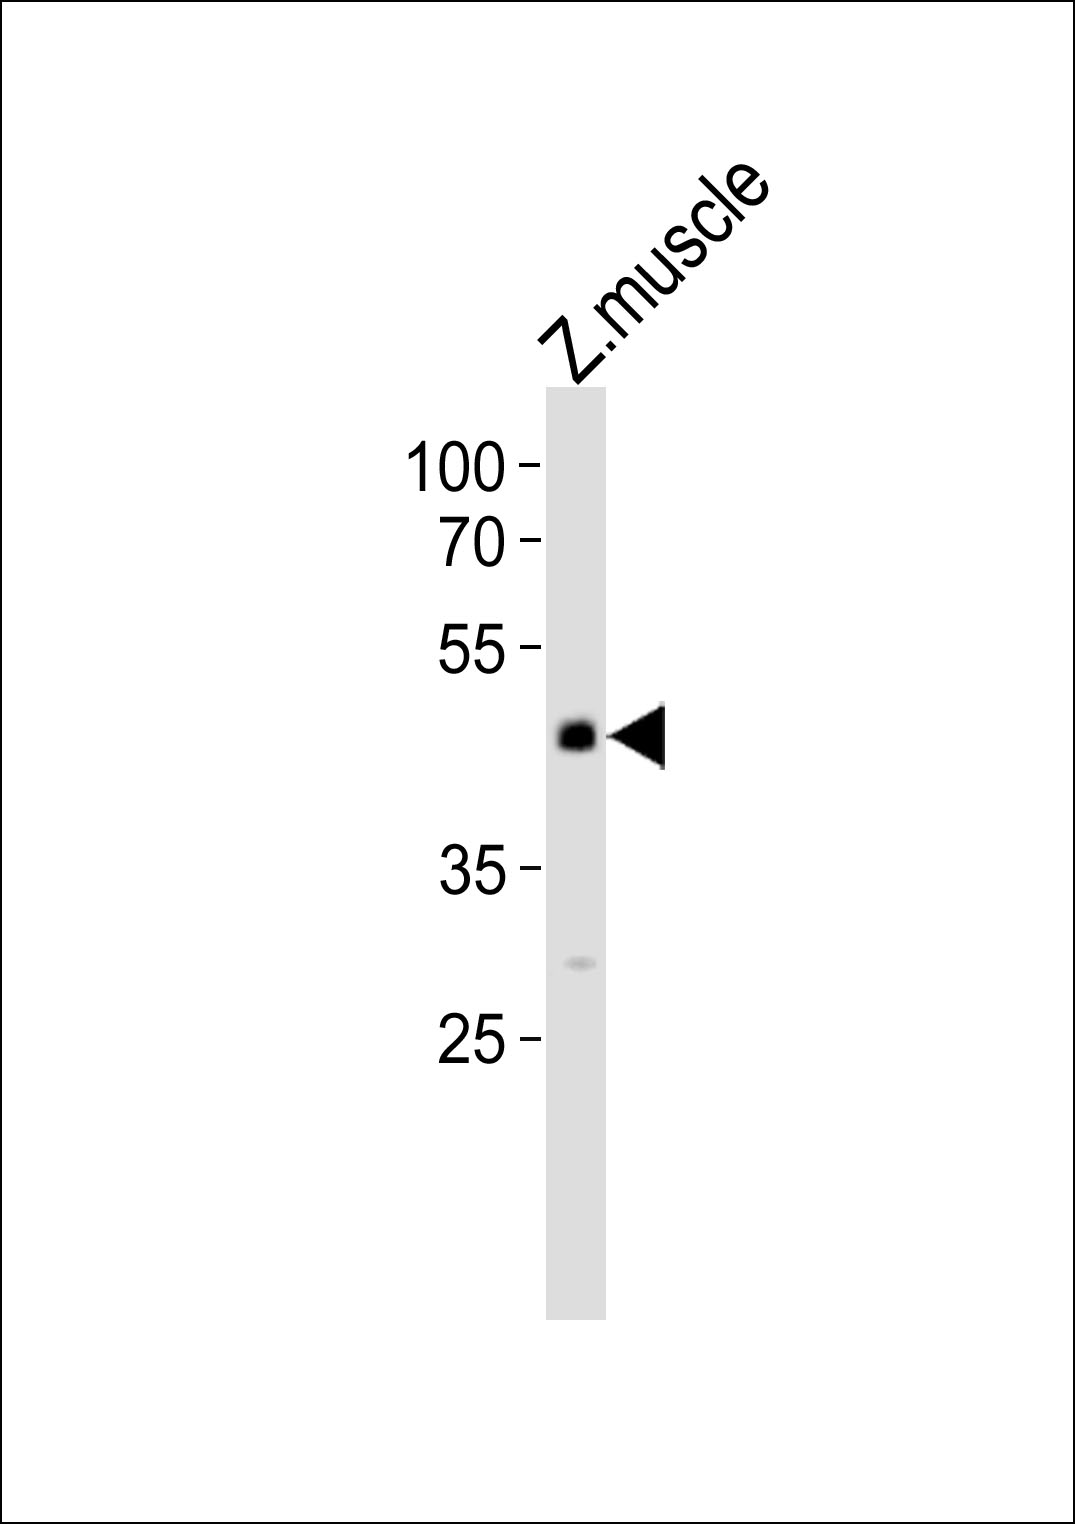 Western blot analysis of lysate fromzebra fish muscle tissue lysate, using (DANRE) mapk8 Antibody(Cat. #Azb18717a).    Azb18717a was diluted at 1:1000.    A goat anti-rabbit IgG H&L(HRP) at 1:10000 dilution was used as the secondary antibody. Lysate at 35ug.